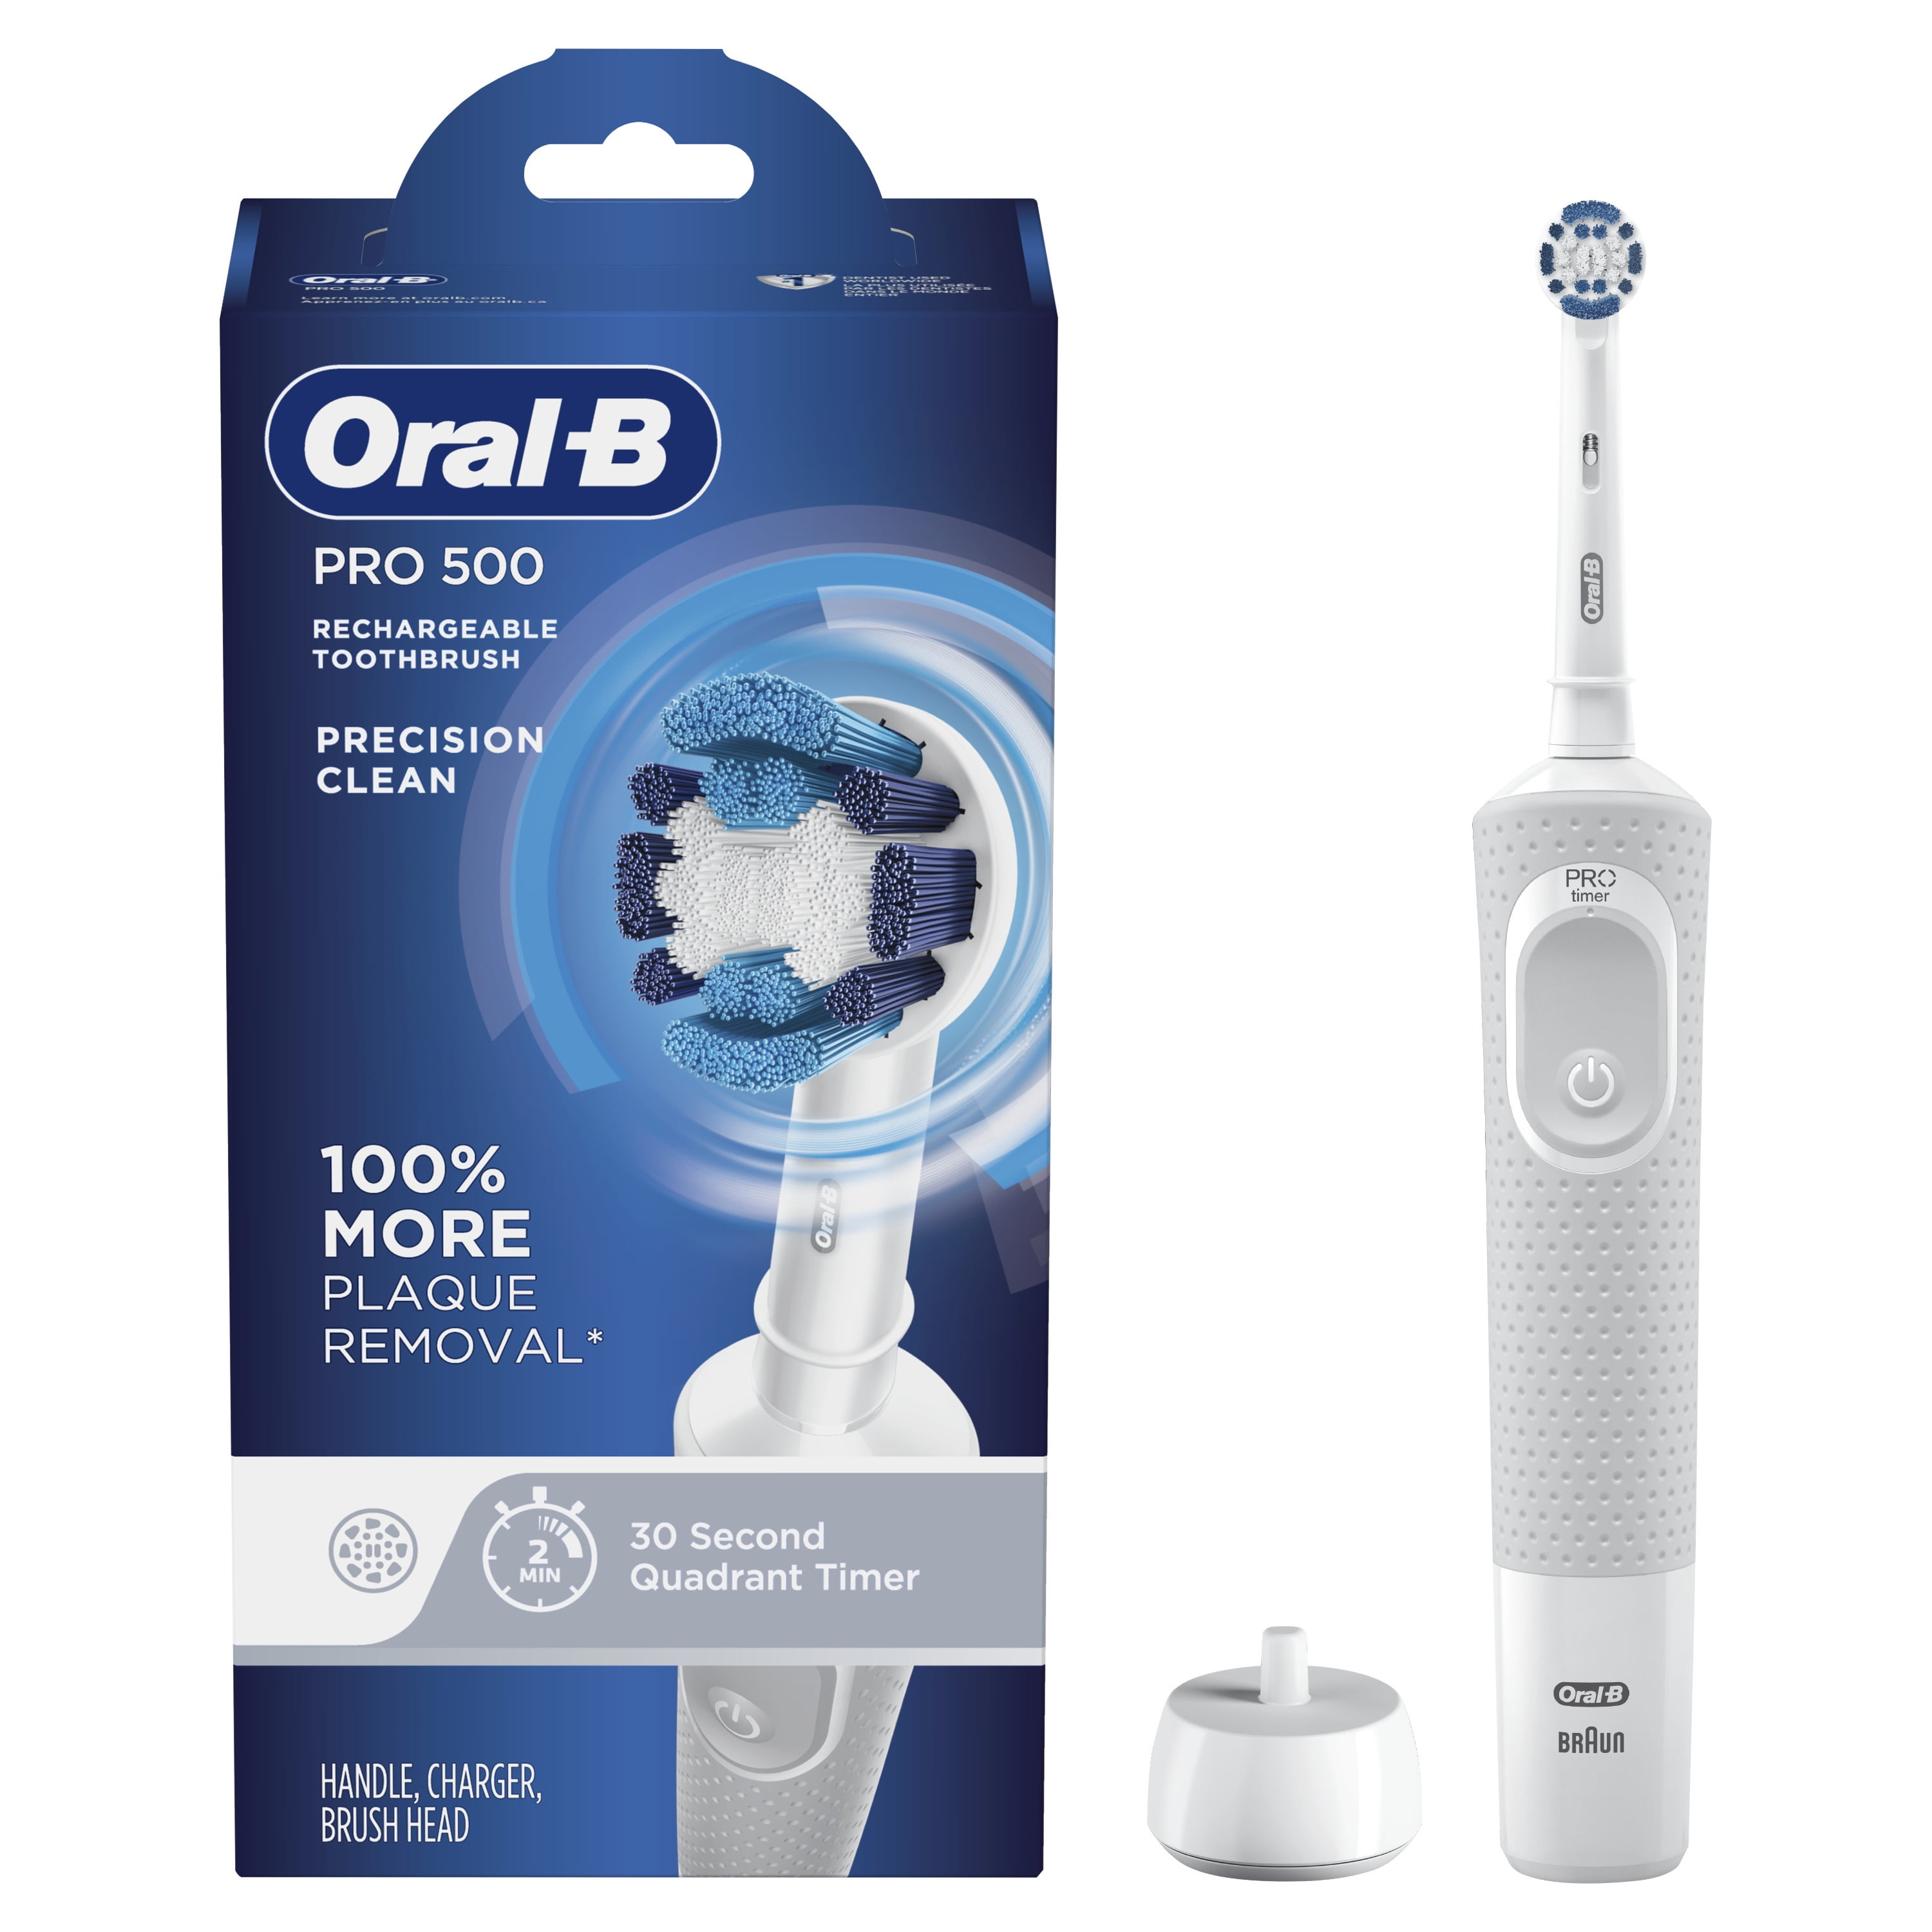 Pro 500 Precision Clean Rechargeable Toothbrush, 1 - Walmart.com